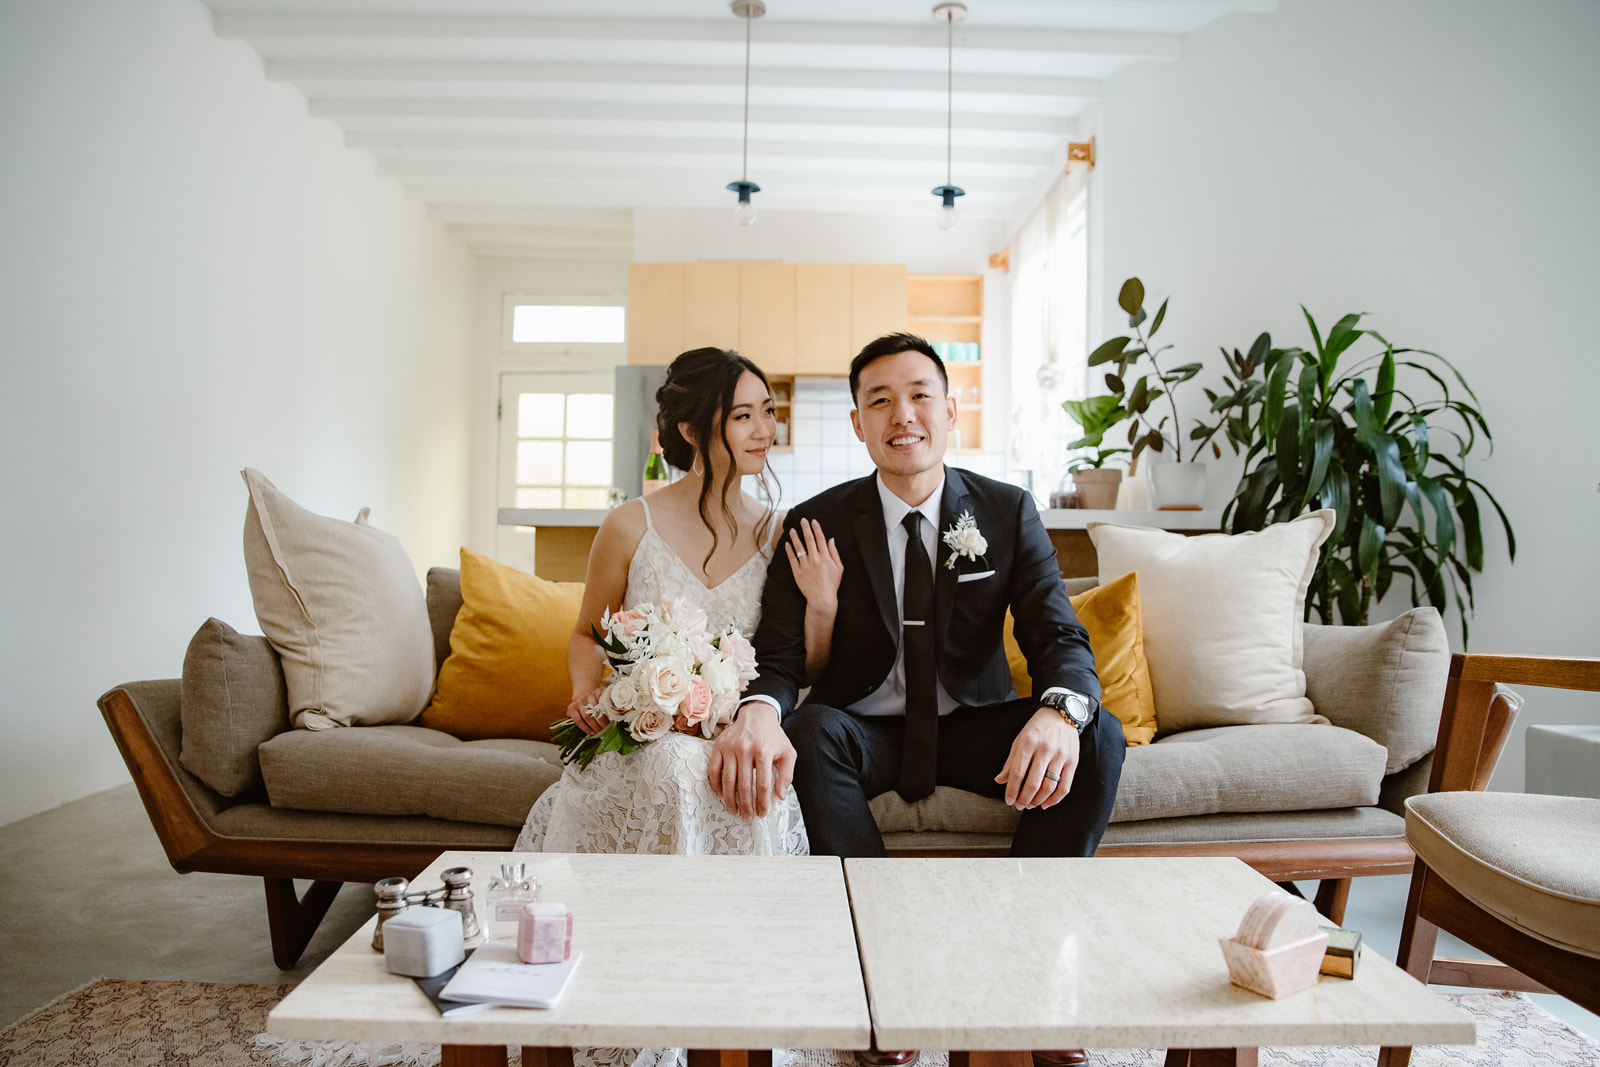 Bride looks at groom while sitting on couch